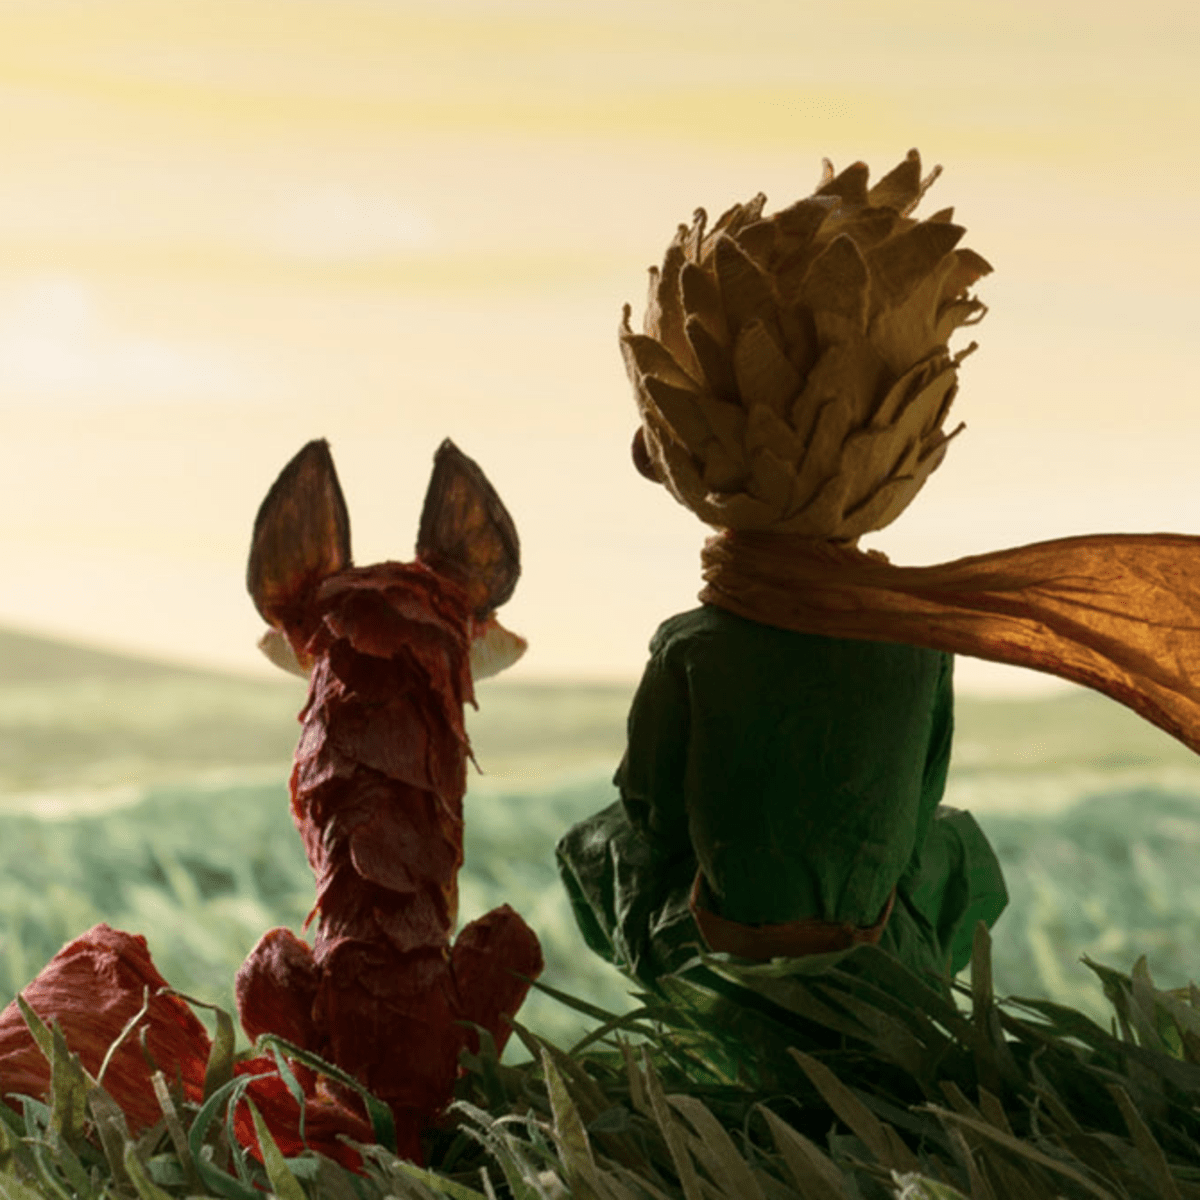 The Little Prince' Looks Like The Most Beautiful Animated Film Ever - Airows